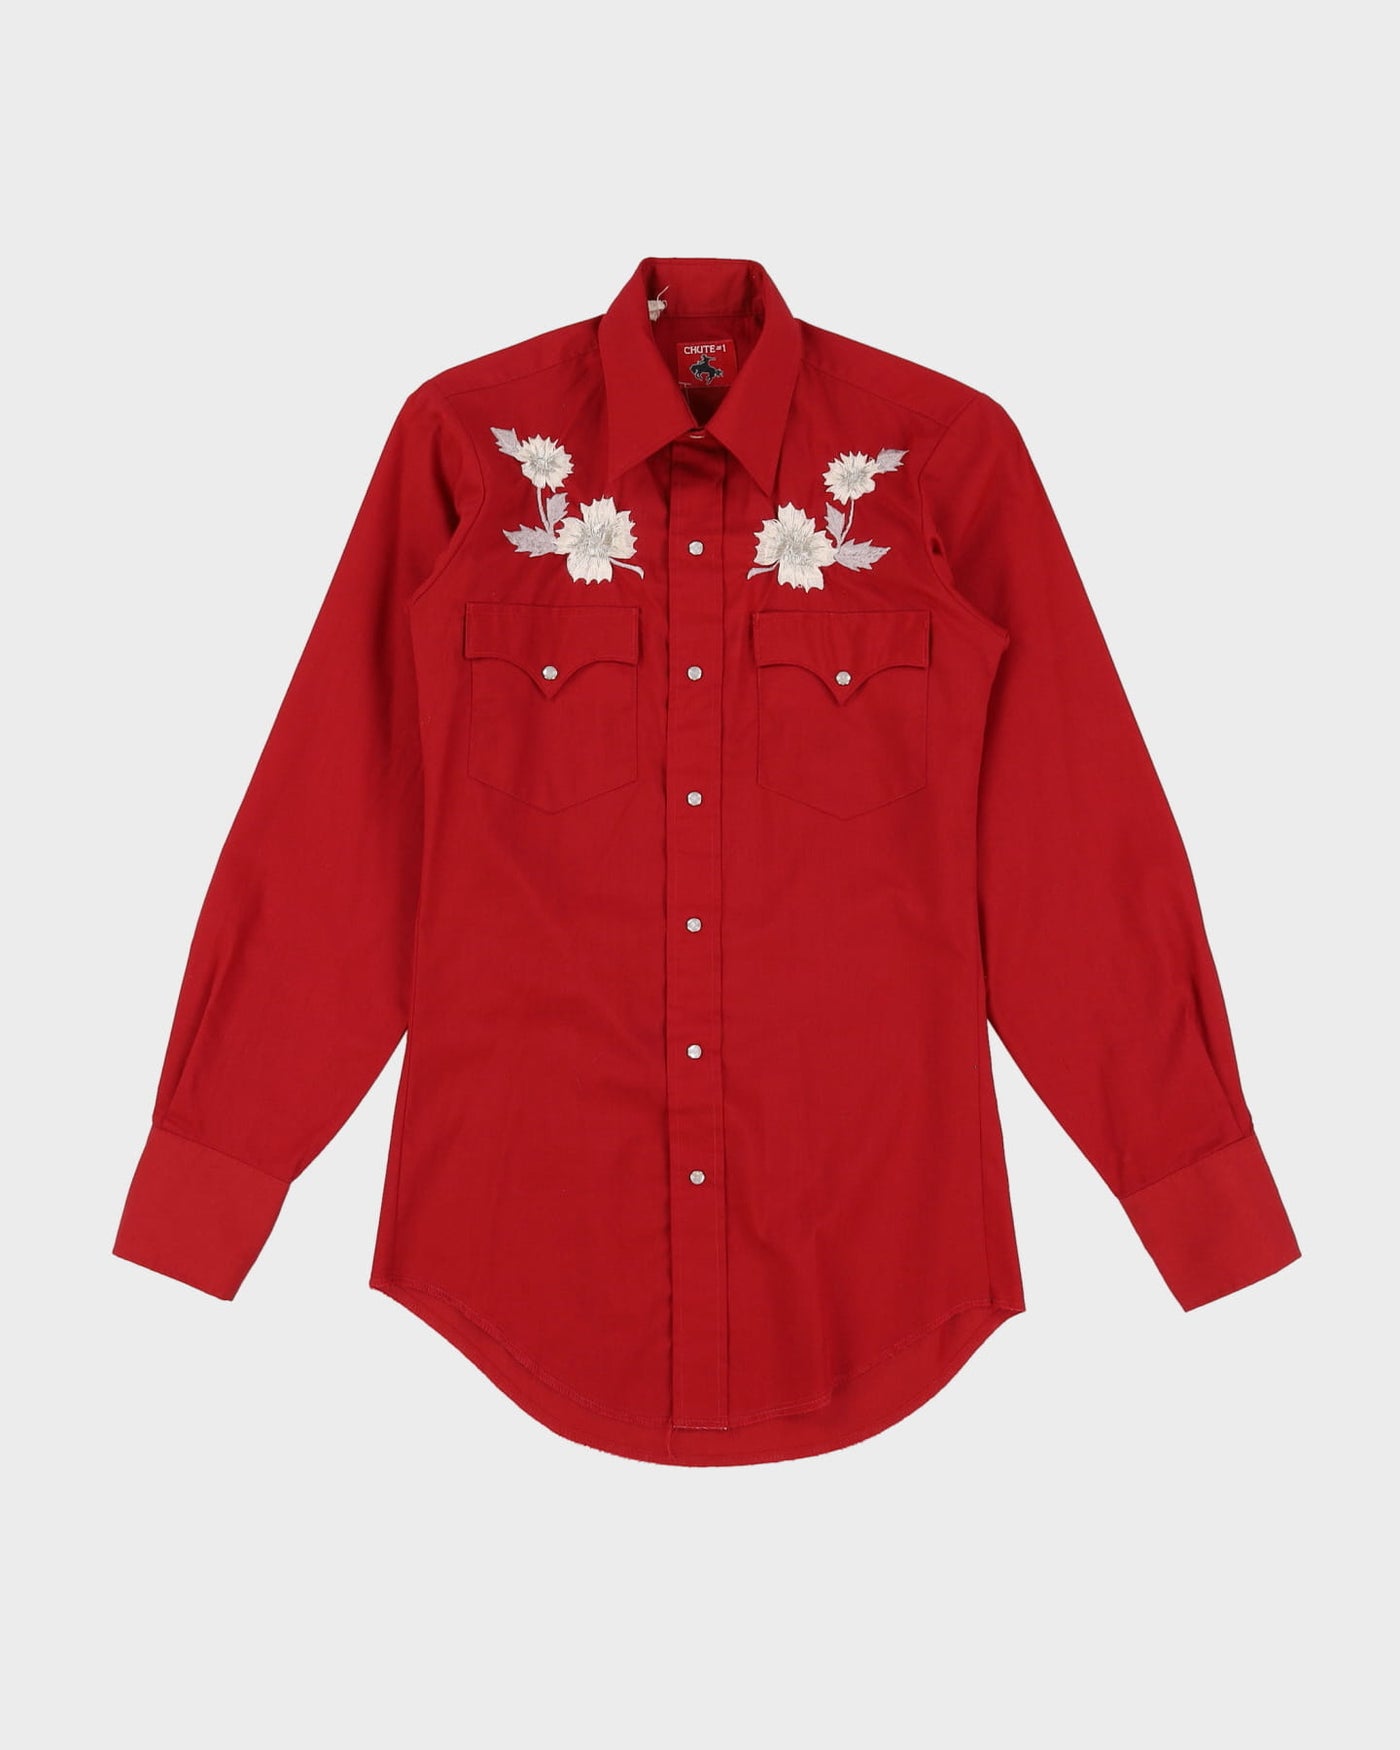 70s Red Floral Western Style Long-Sleeve Shirt - S